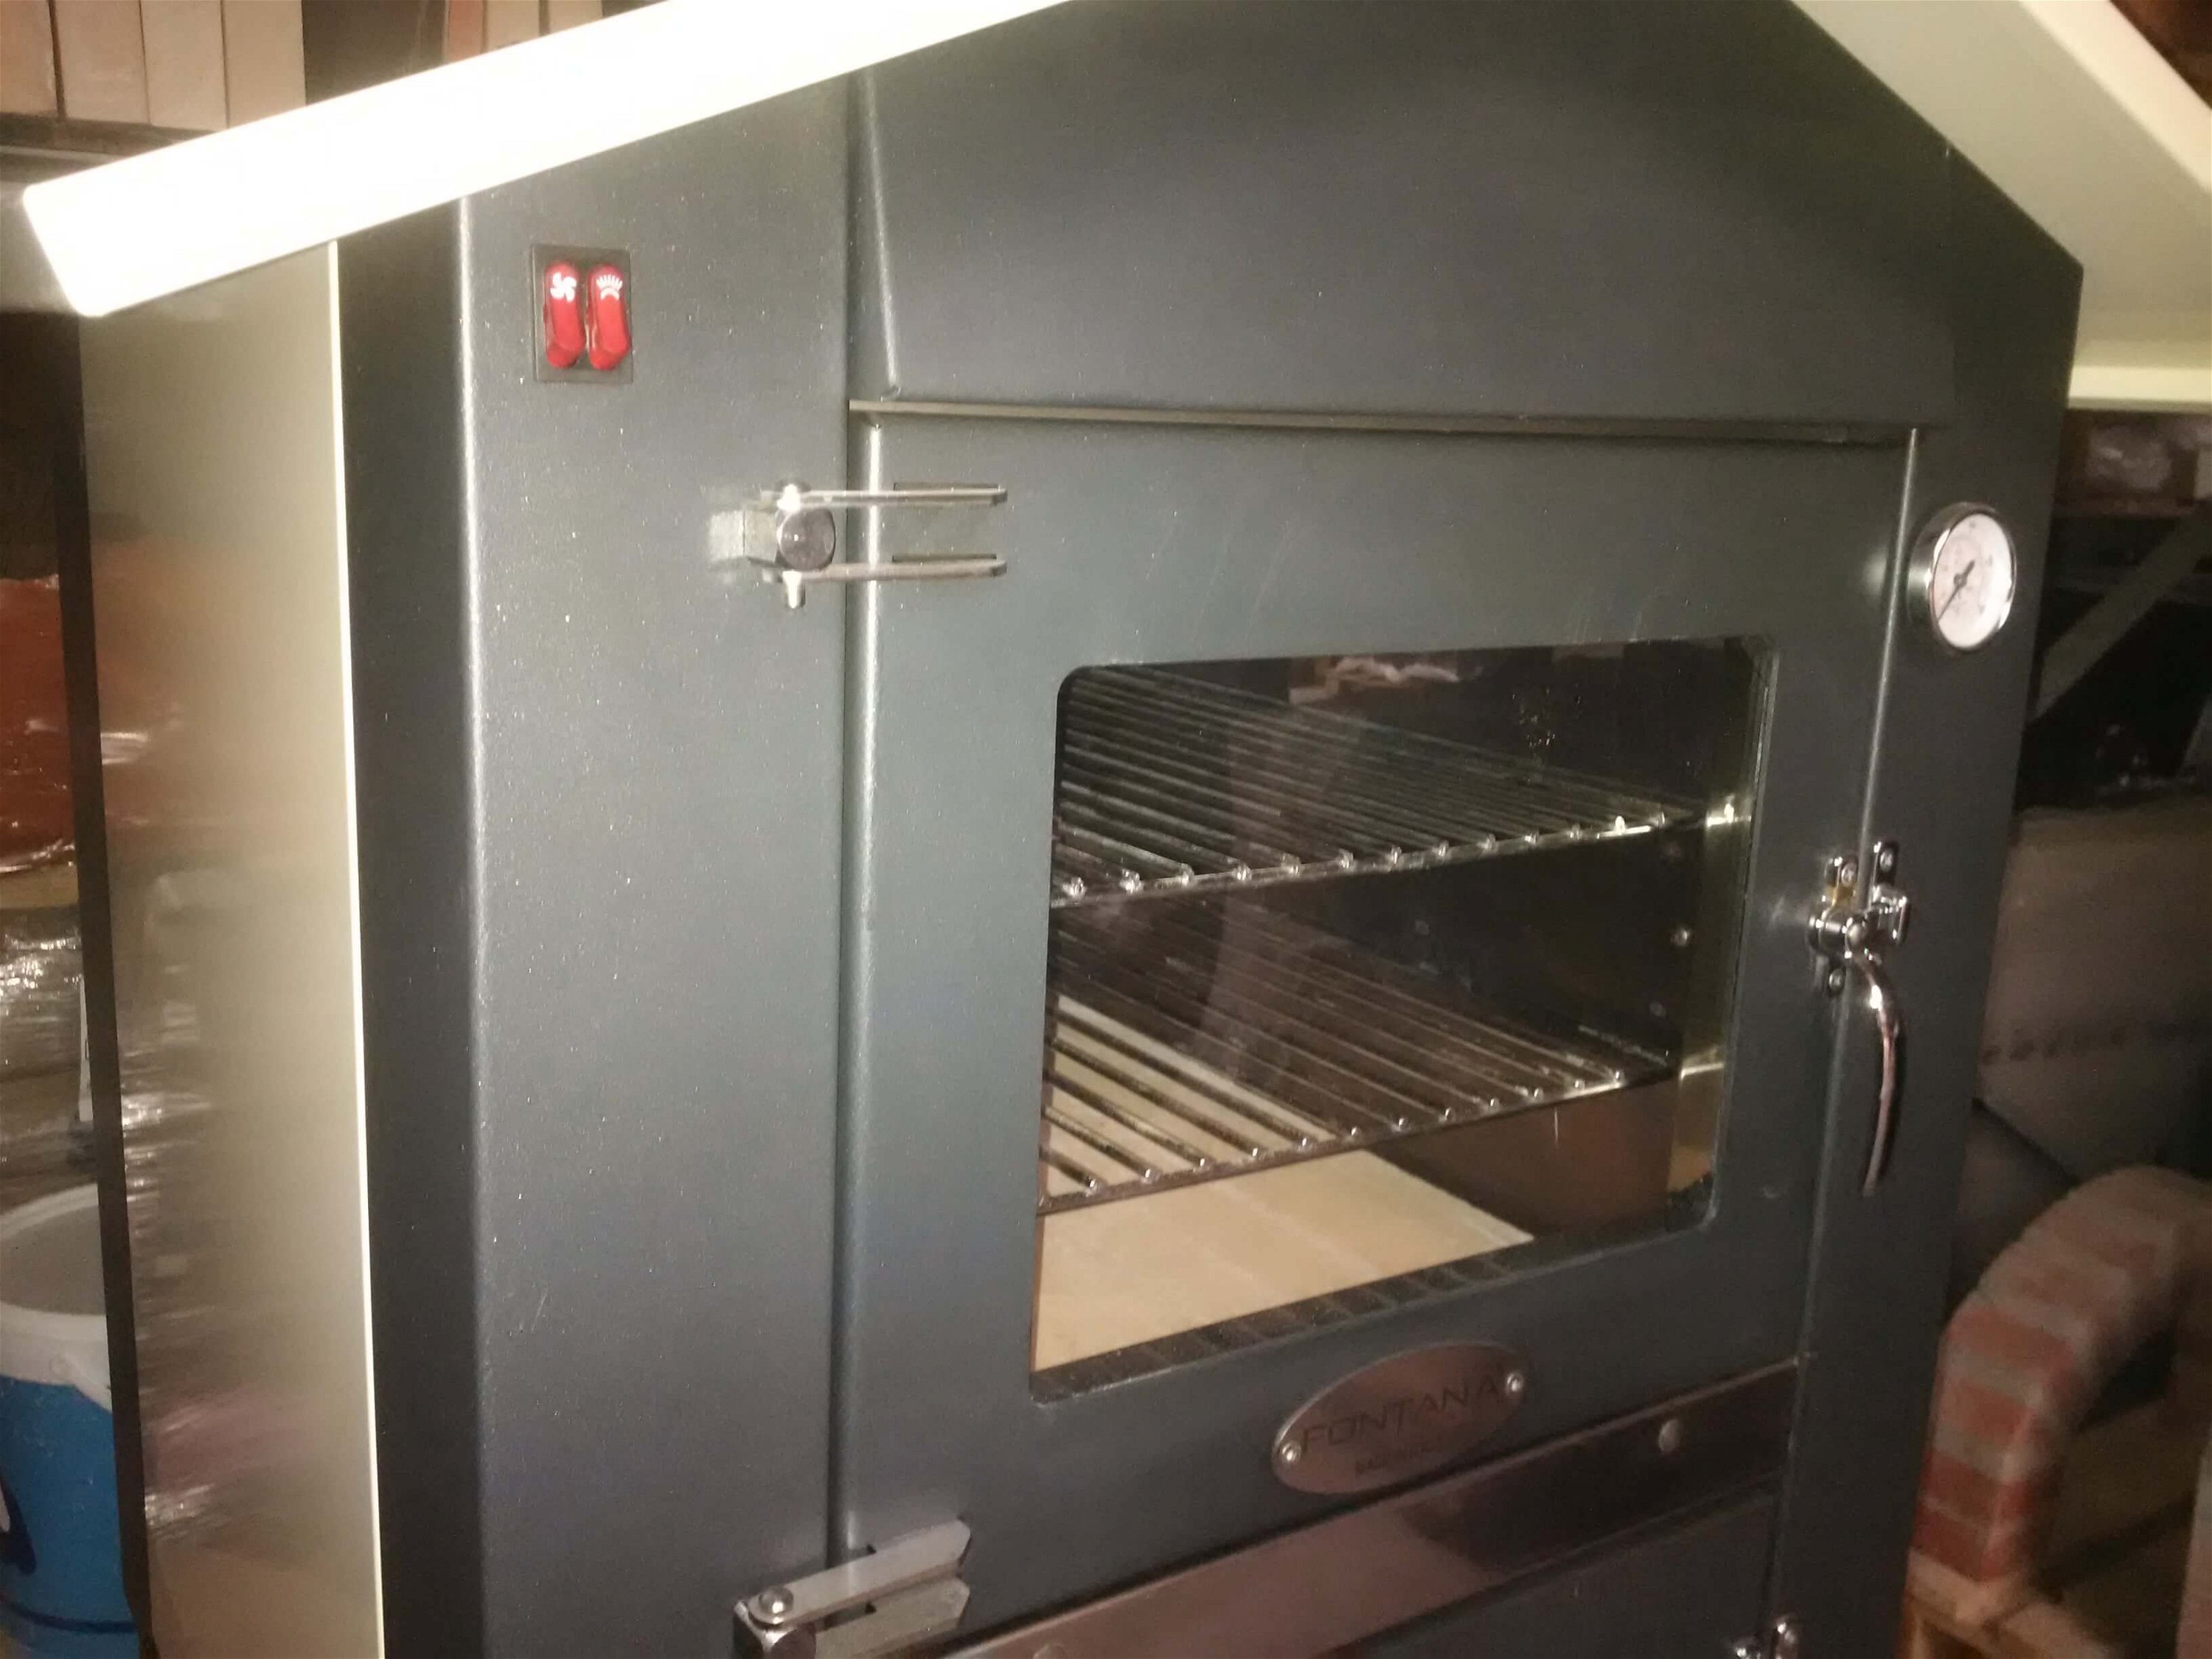 Wood burning oven, bread oven Fontana Forno Italia Incasso, the built-in oven with wood firing for the kitchen.